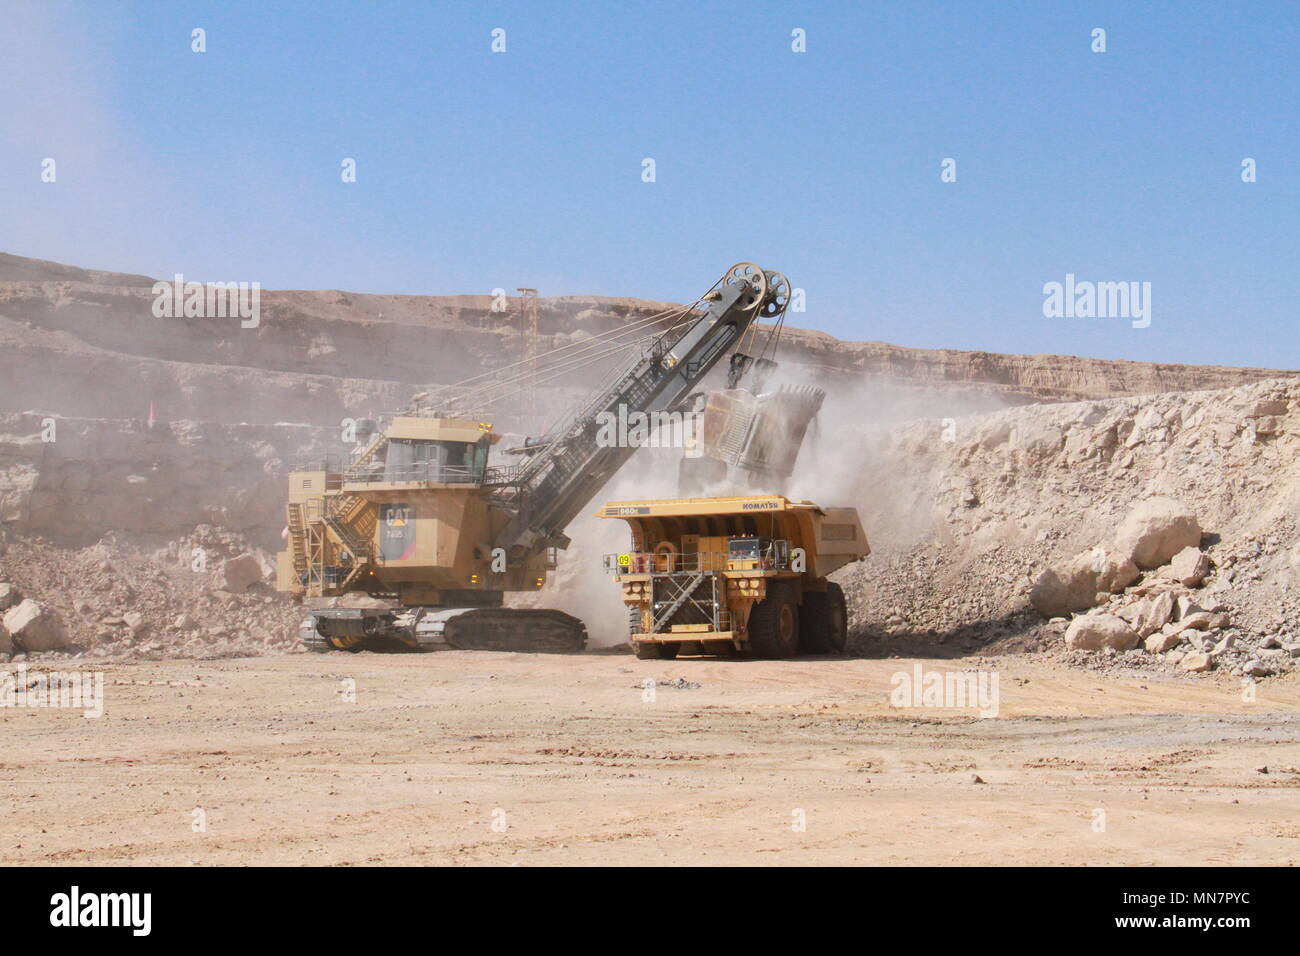 Swakopmund. 11th May, 2018. Photo taken on May 11, 2018 shows a haul truck (R) working at Husab Uranium Mine in western Namibia. The Husab mine is one of the biggest uranium mines in the world. Credit: Wu Changwei/Xinhua/Alamy Live News Stock Photo